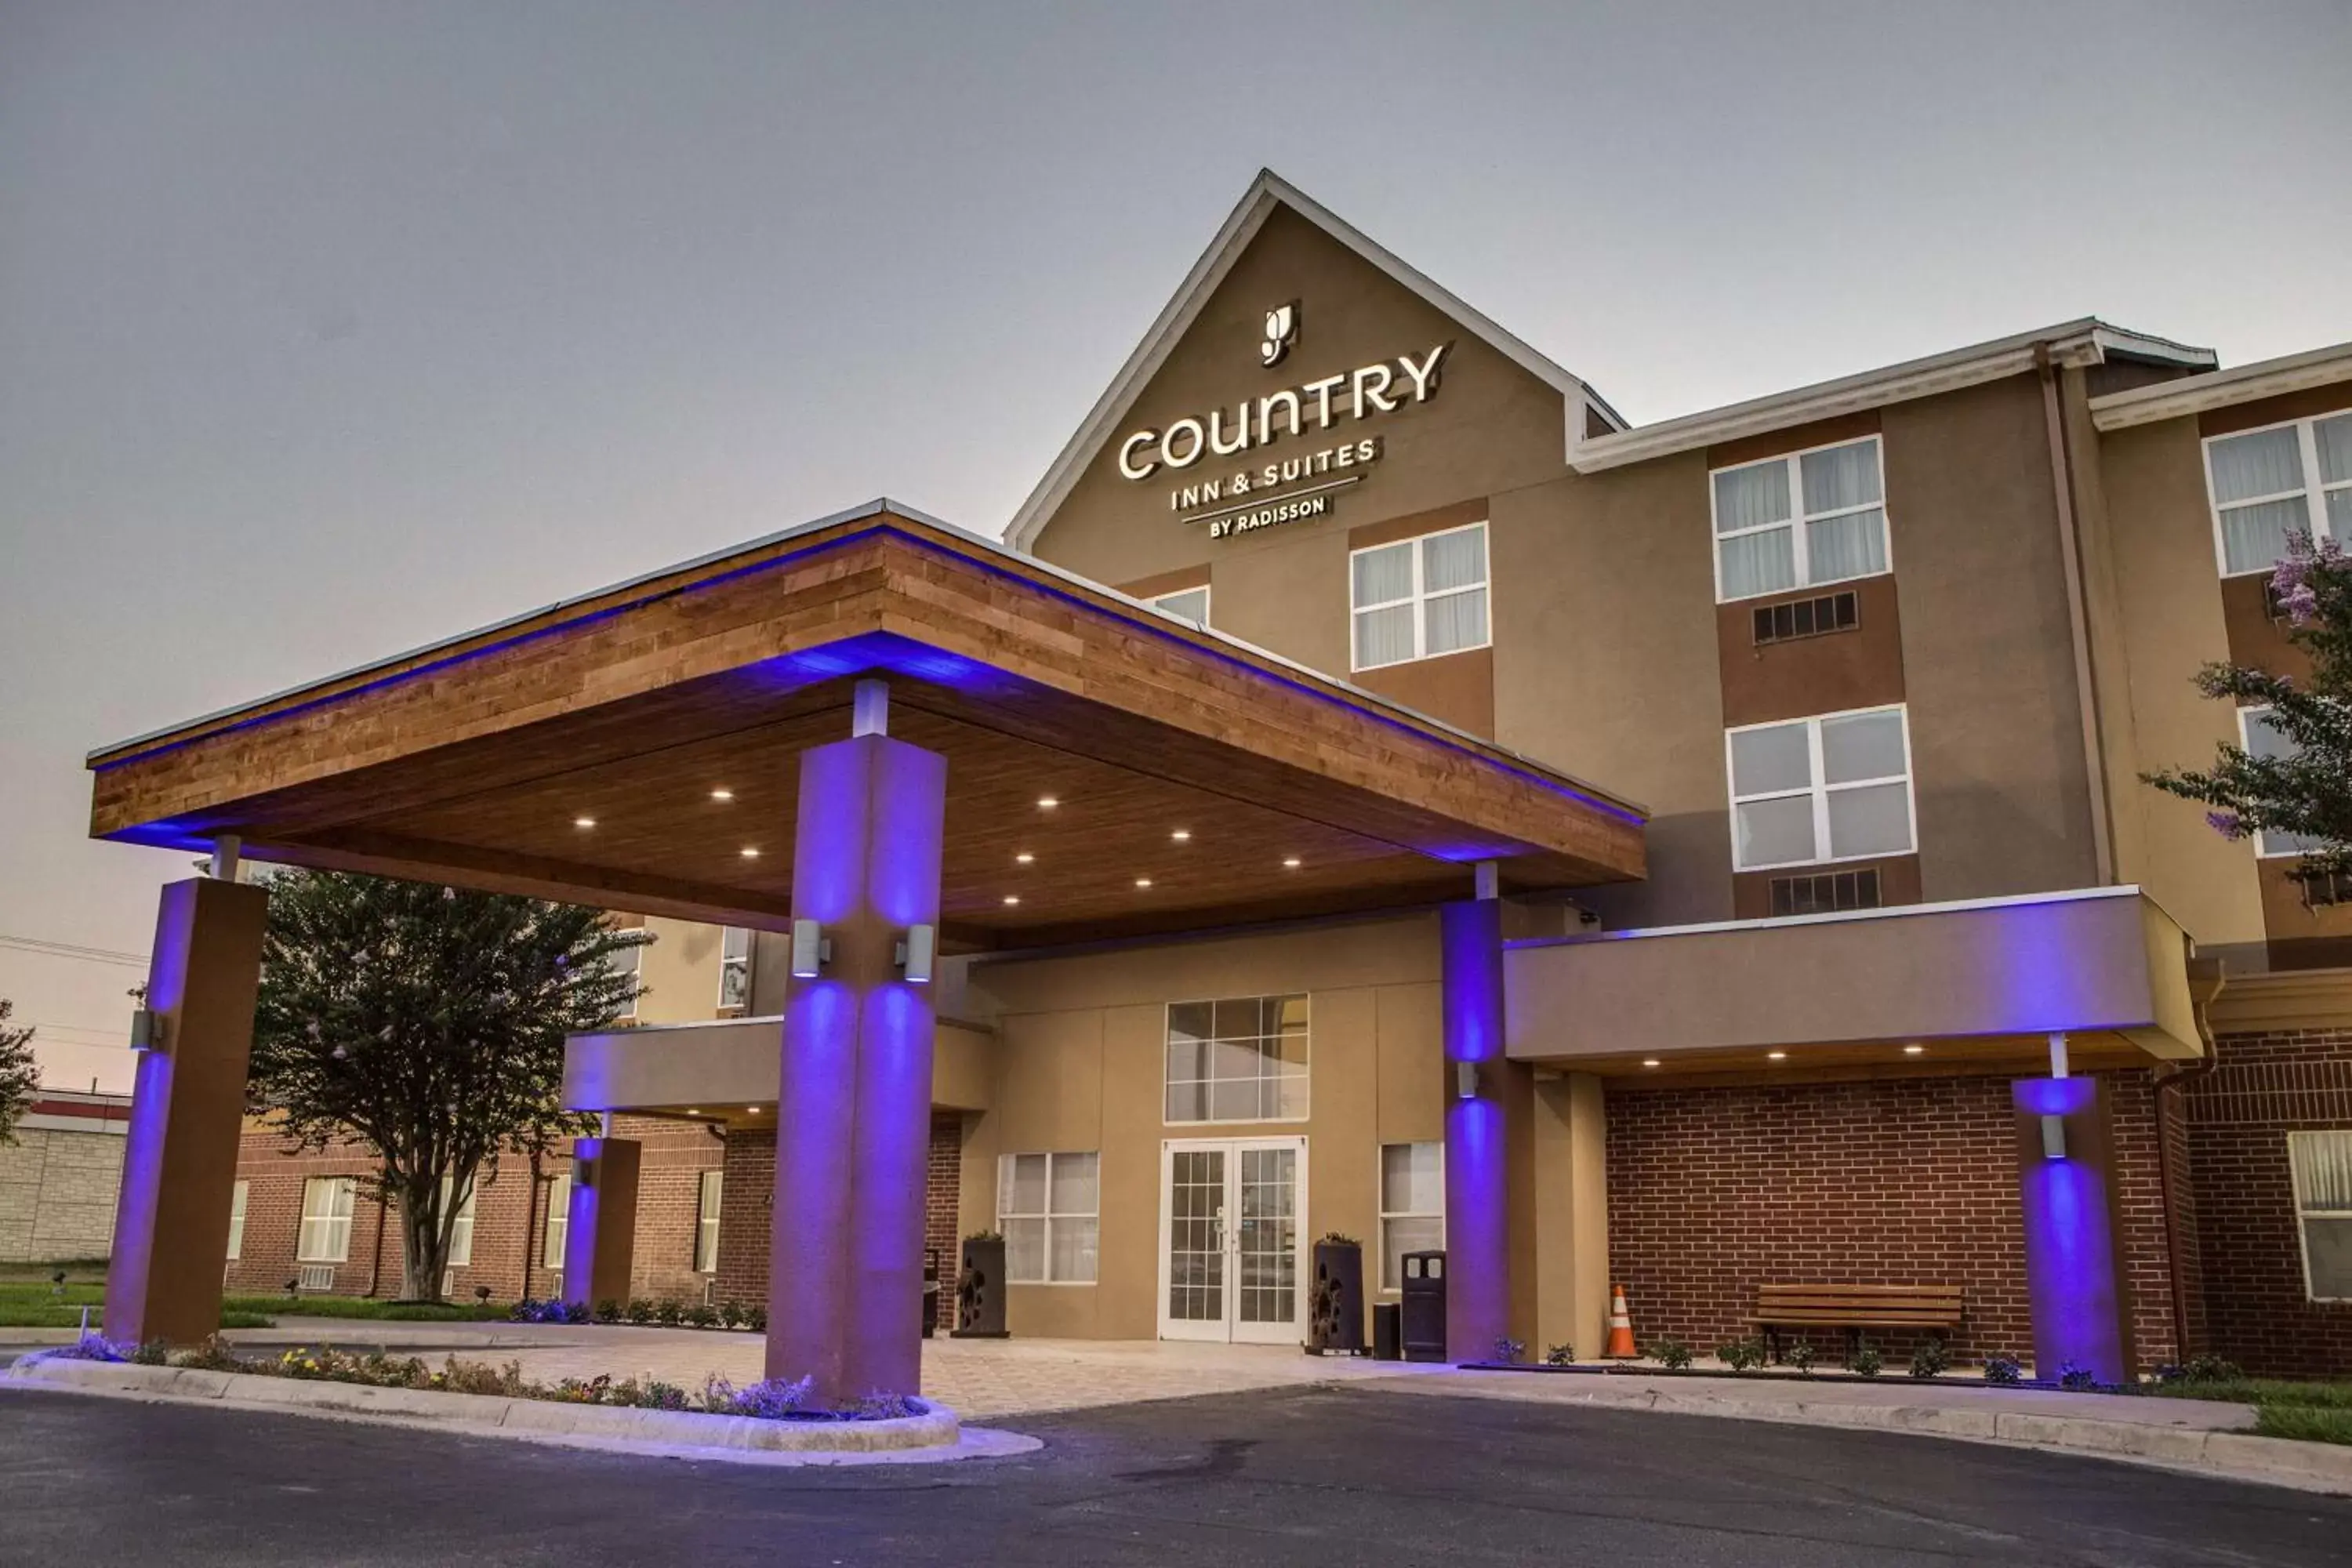 Property building in Country Inn & Suites by Radisson, Harlingen, TX